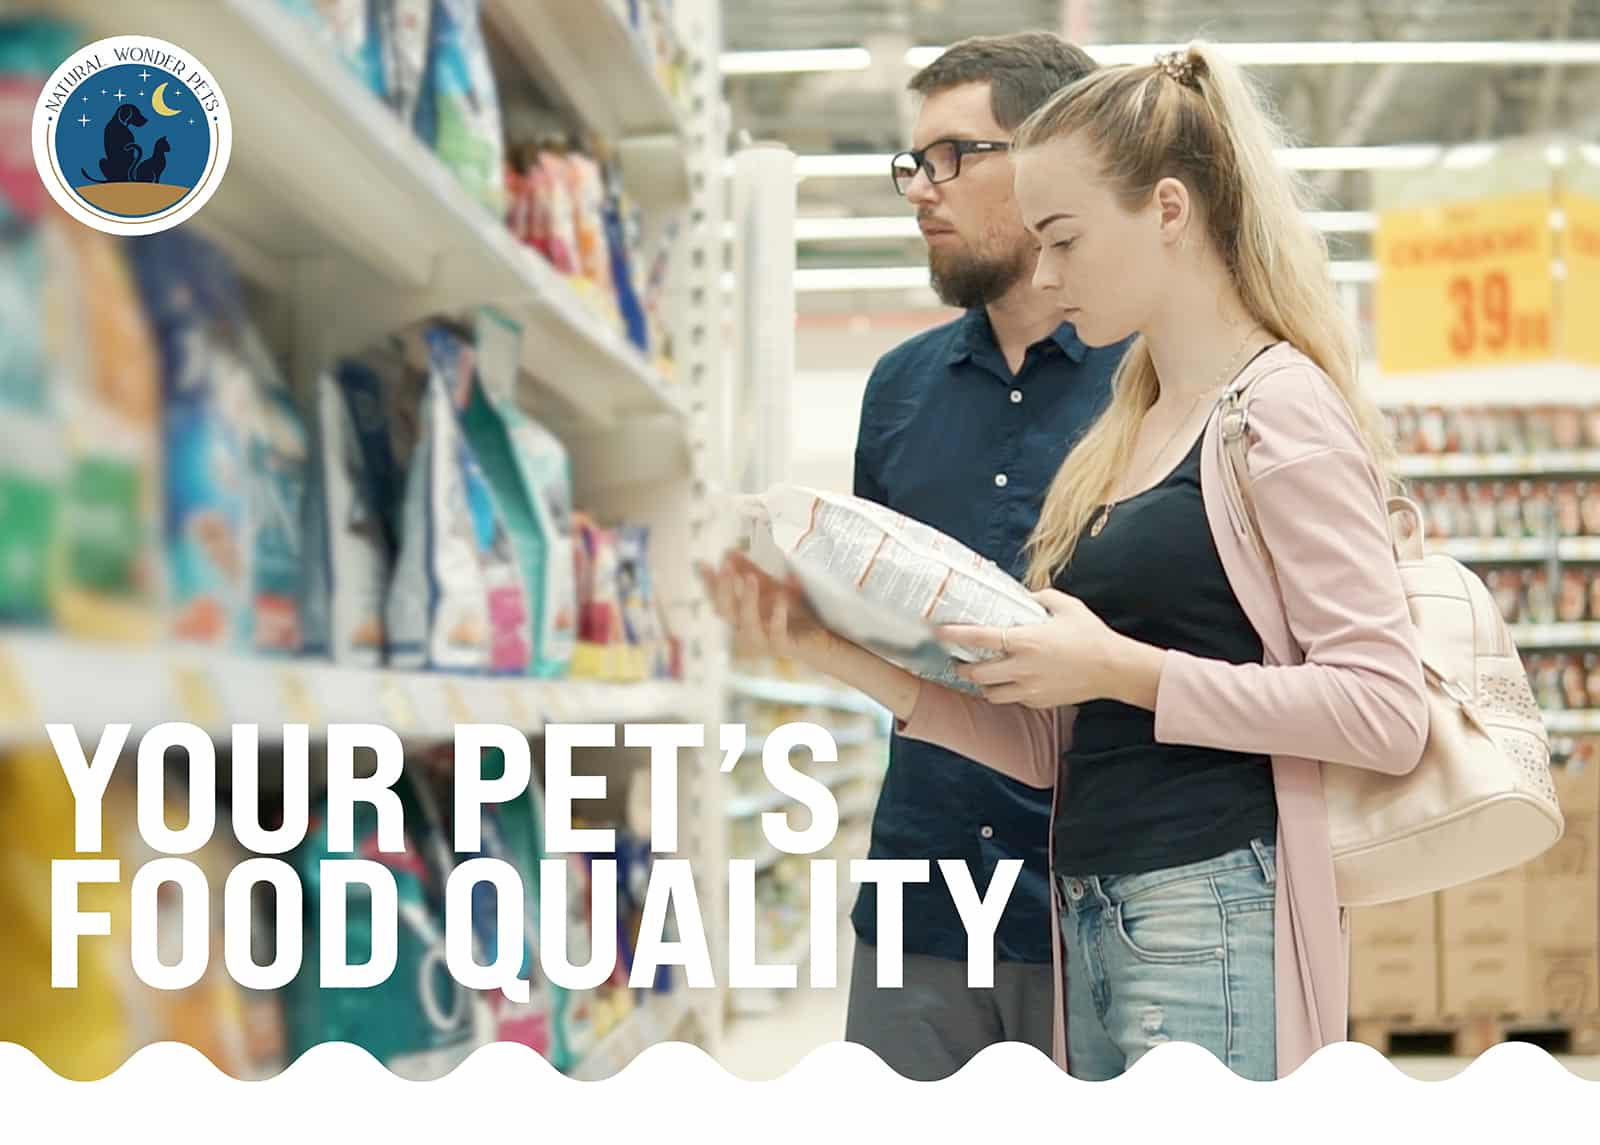 Couple Shopping for Pet Food